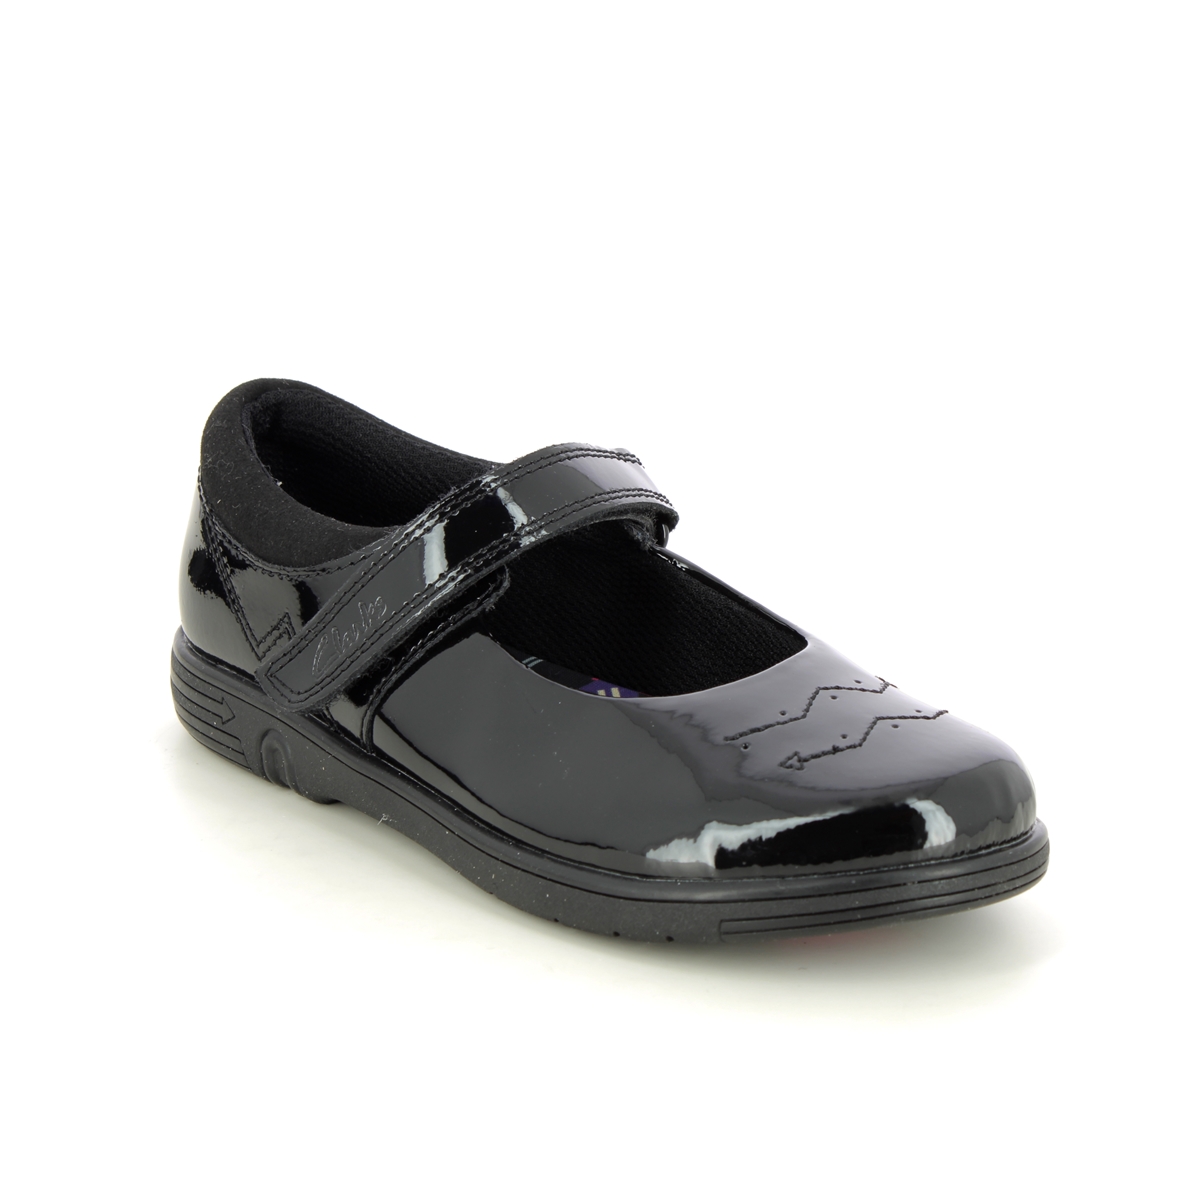 Clarks Jazzy Jig K Mary Jane Black Patent Kids Girls School Shoes 753086F In Size 9 In Plain Black Patent F Width Fitting Regular Fit For School For k